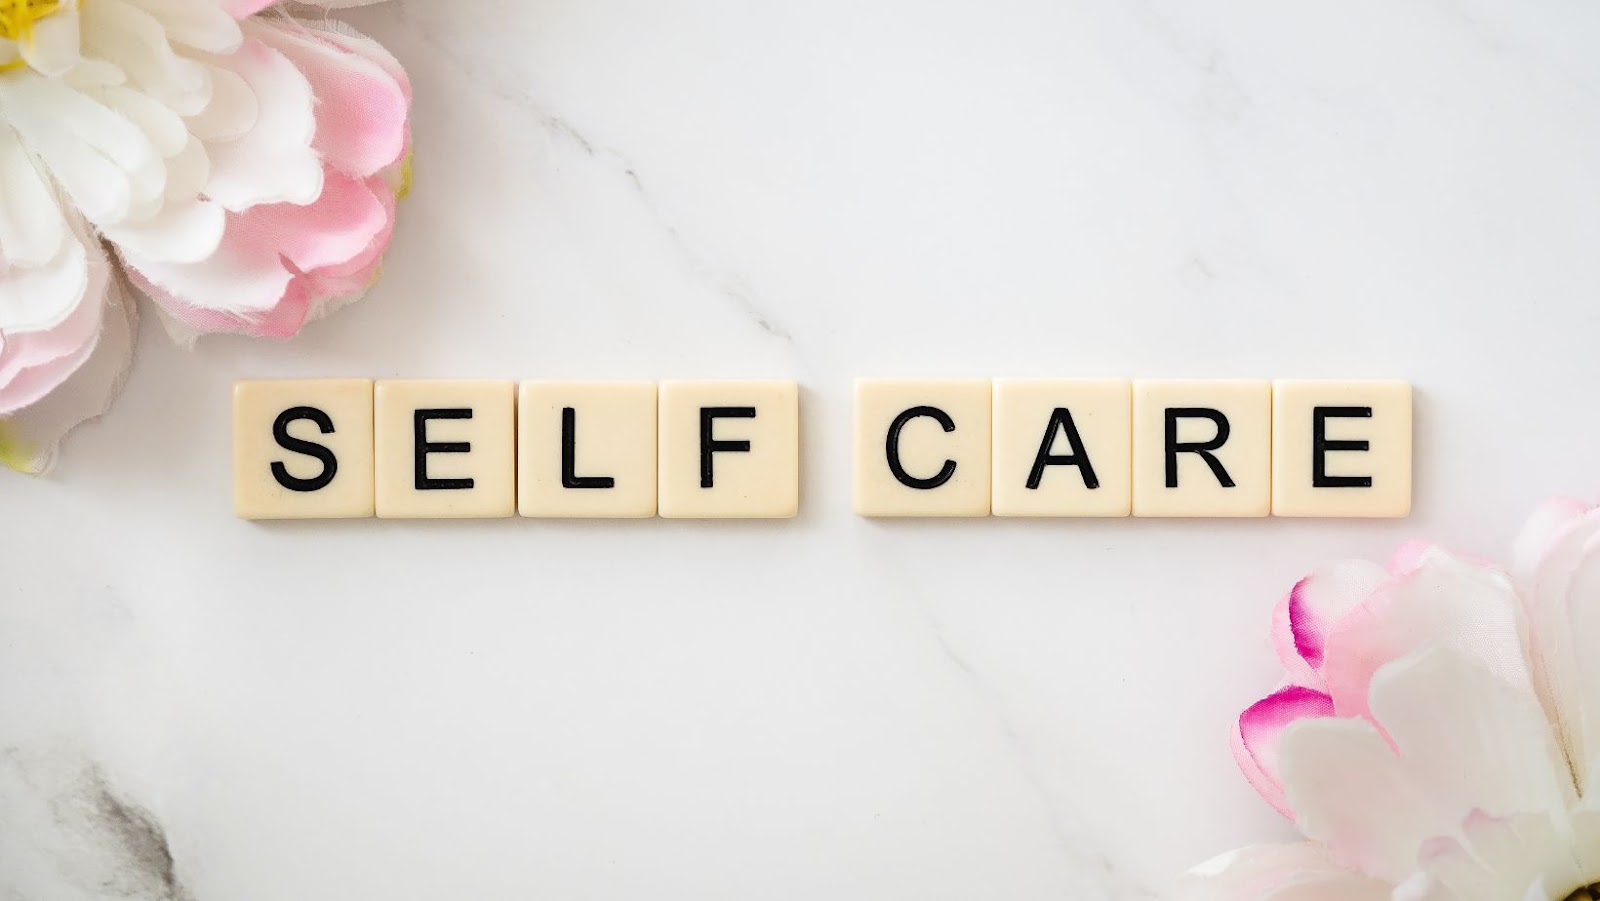 WHAT DOES SELF-CARE MEAN?